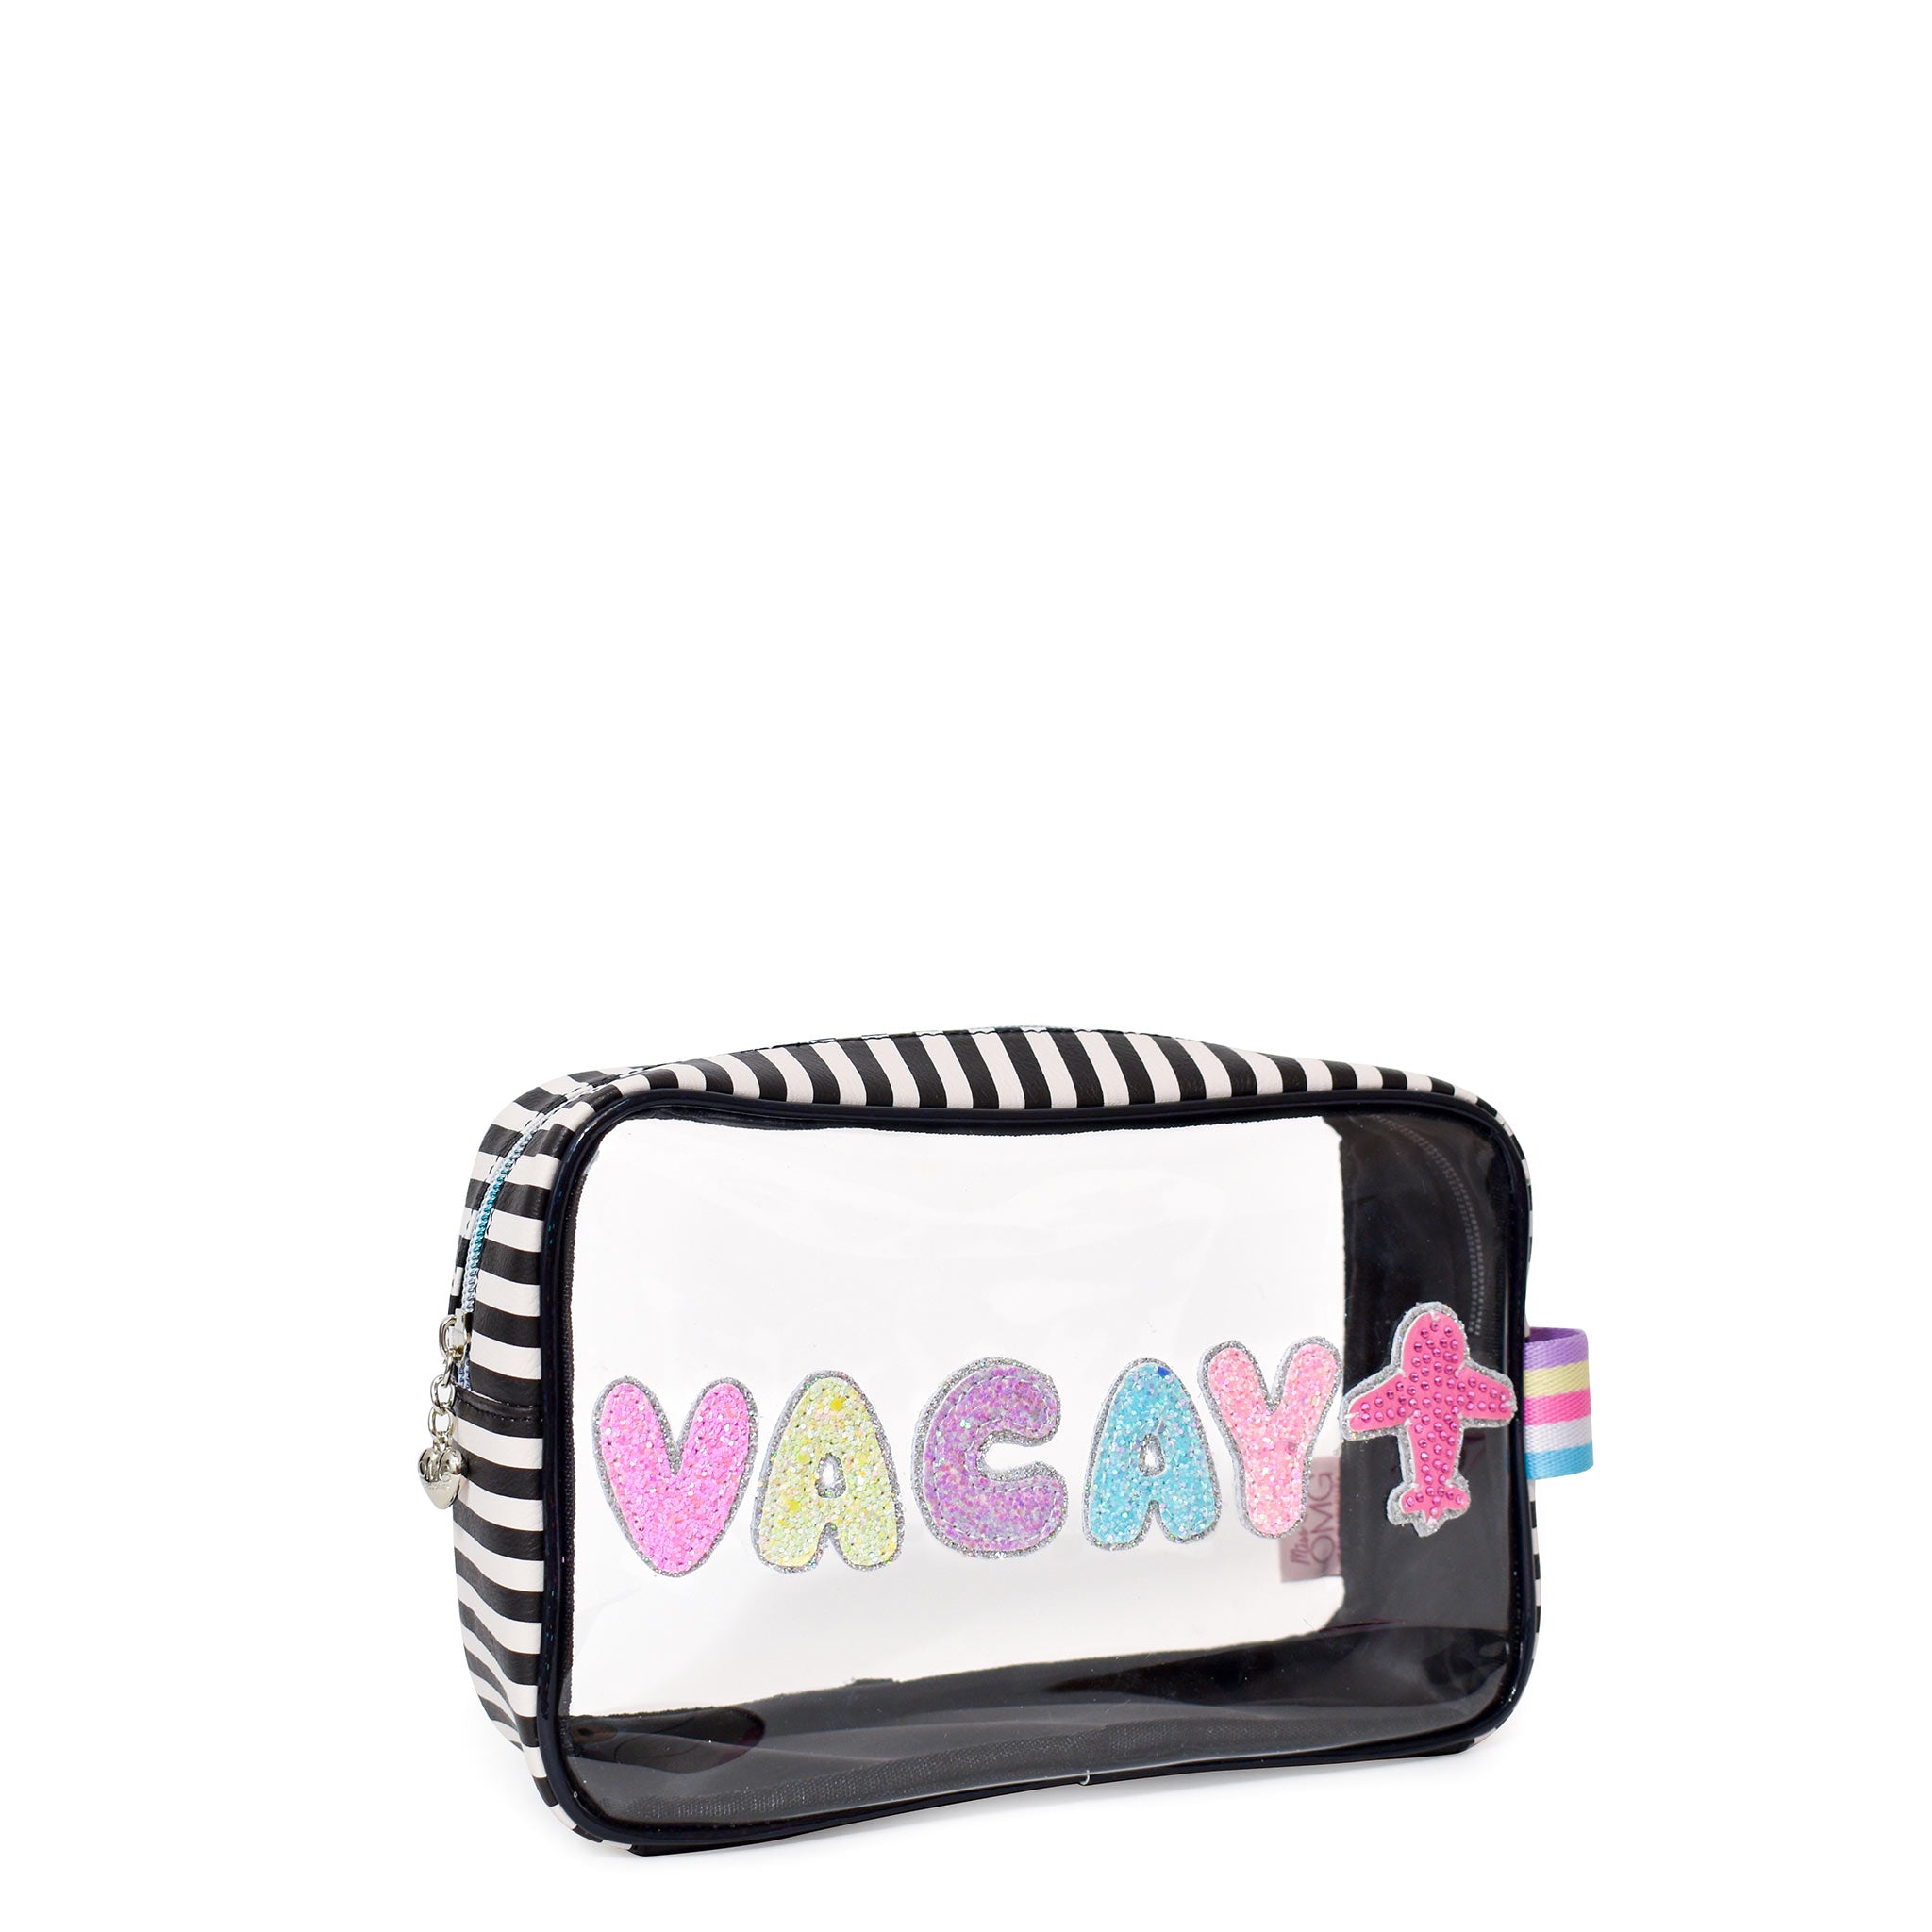 Side view of black-and-white striped 'Vacay' pouch with glitter bubble-letter patches and rhinestone airplane patch